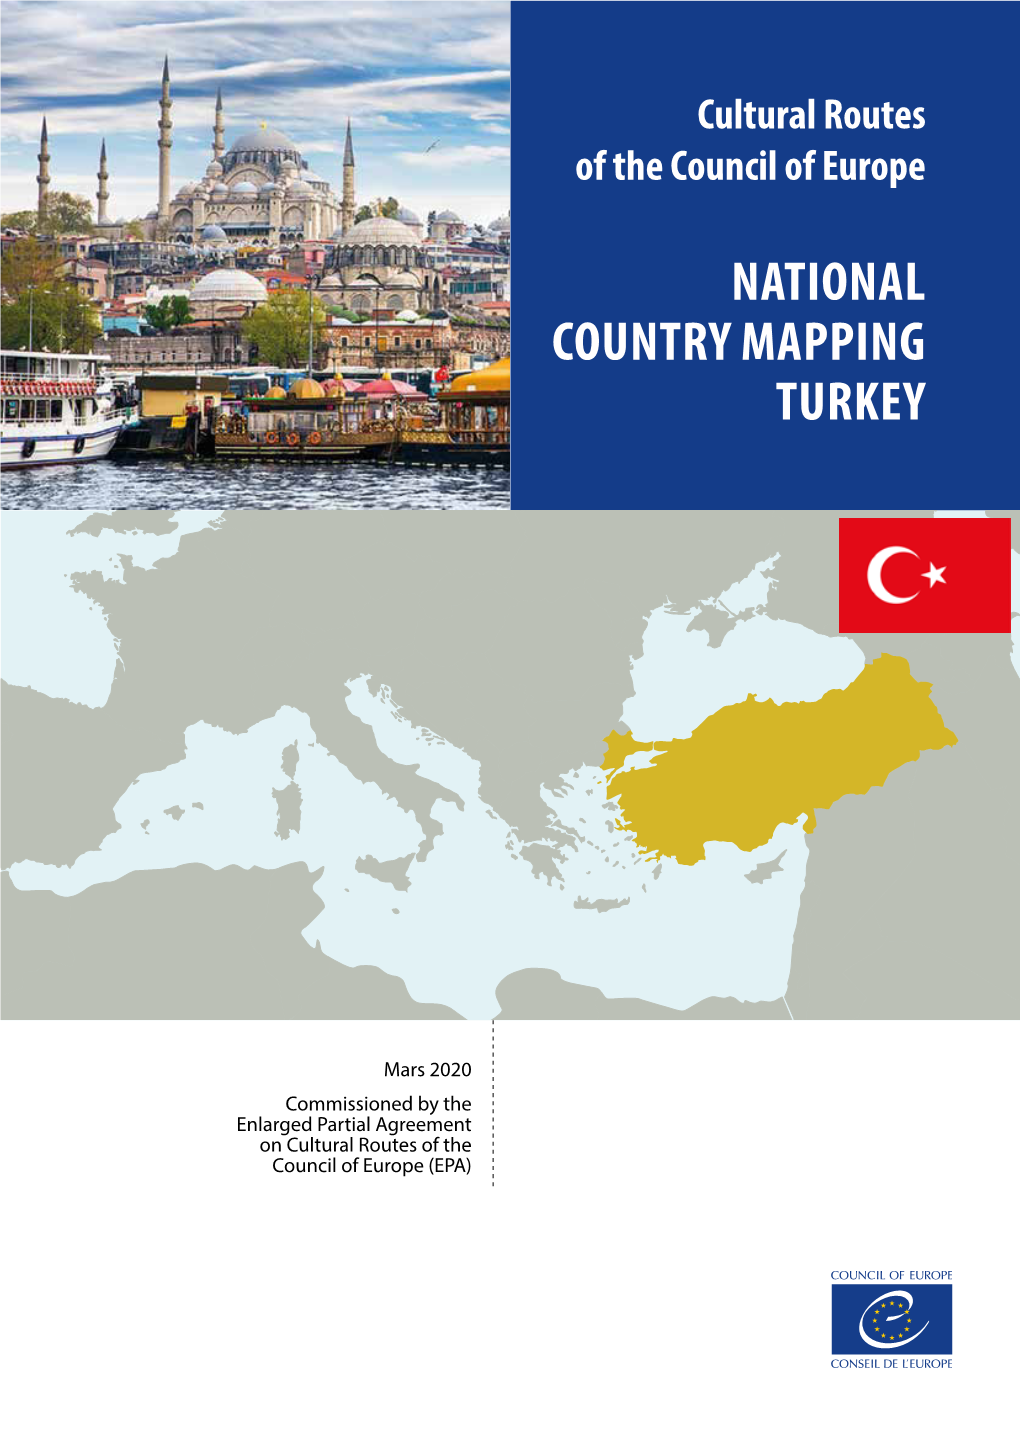 National Country Mapping Turkey